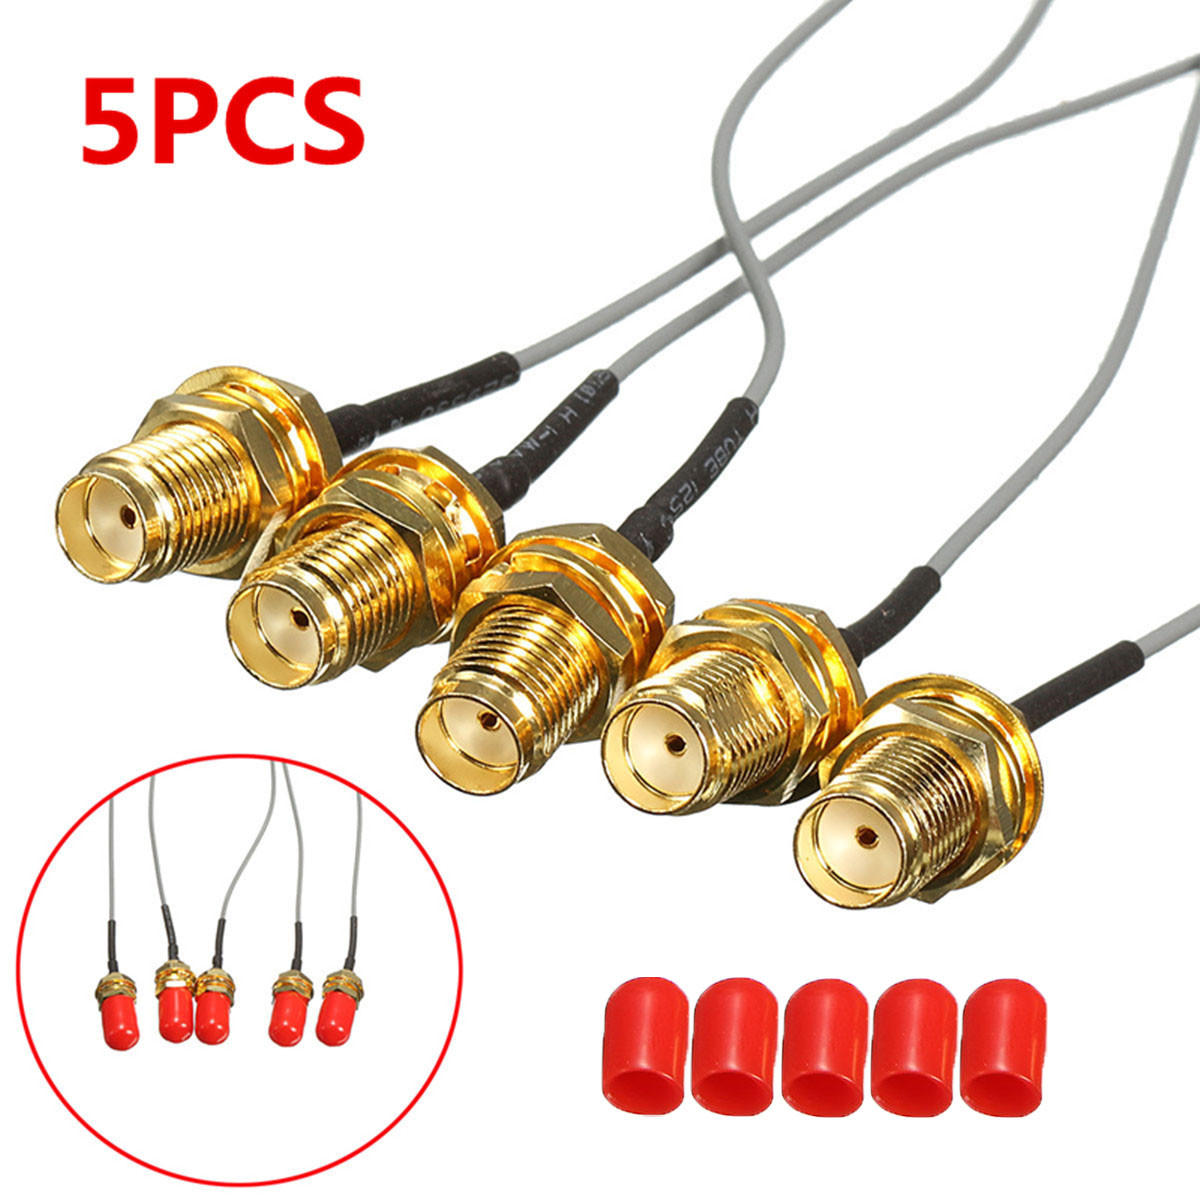 DANIU 5 Pcs 15cm 5.9 inch SMA to IPEX RF Female Adapter Cable with Red Cover Caps